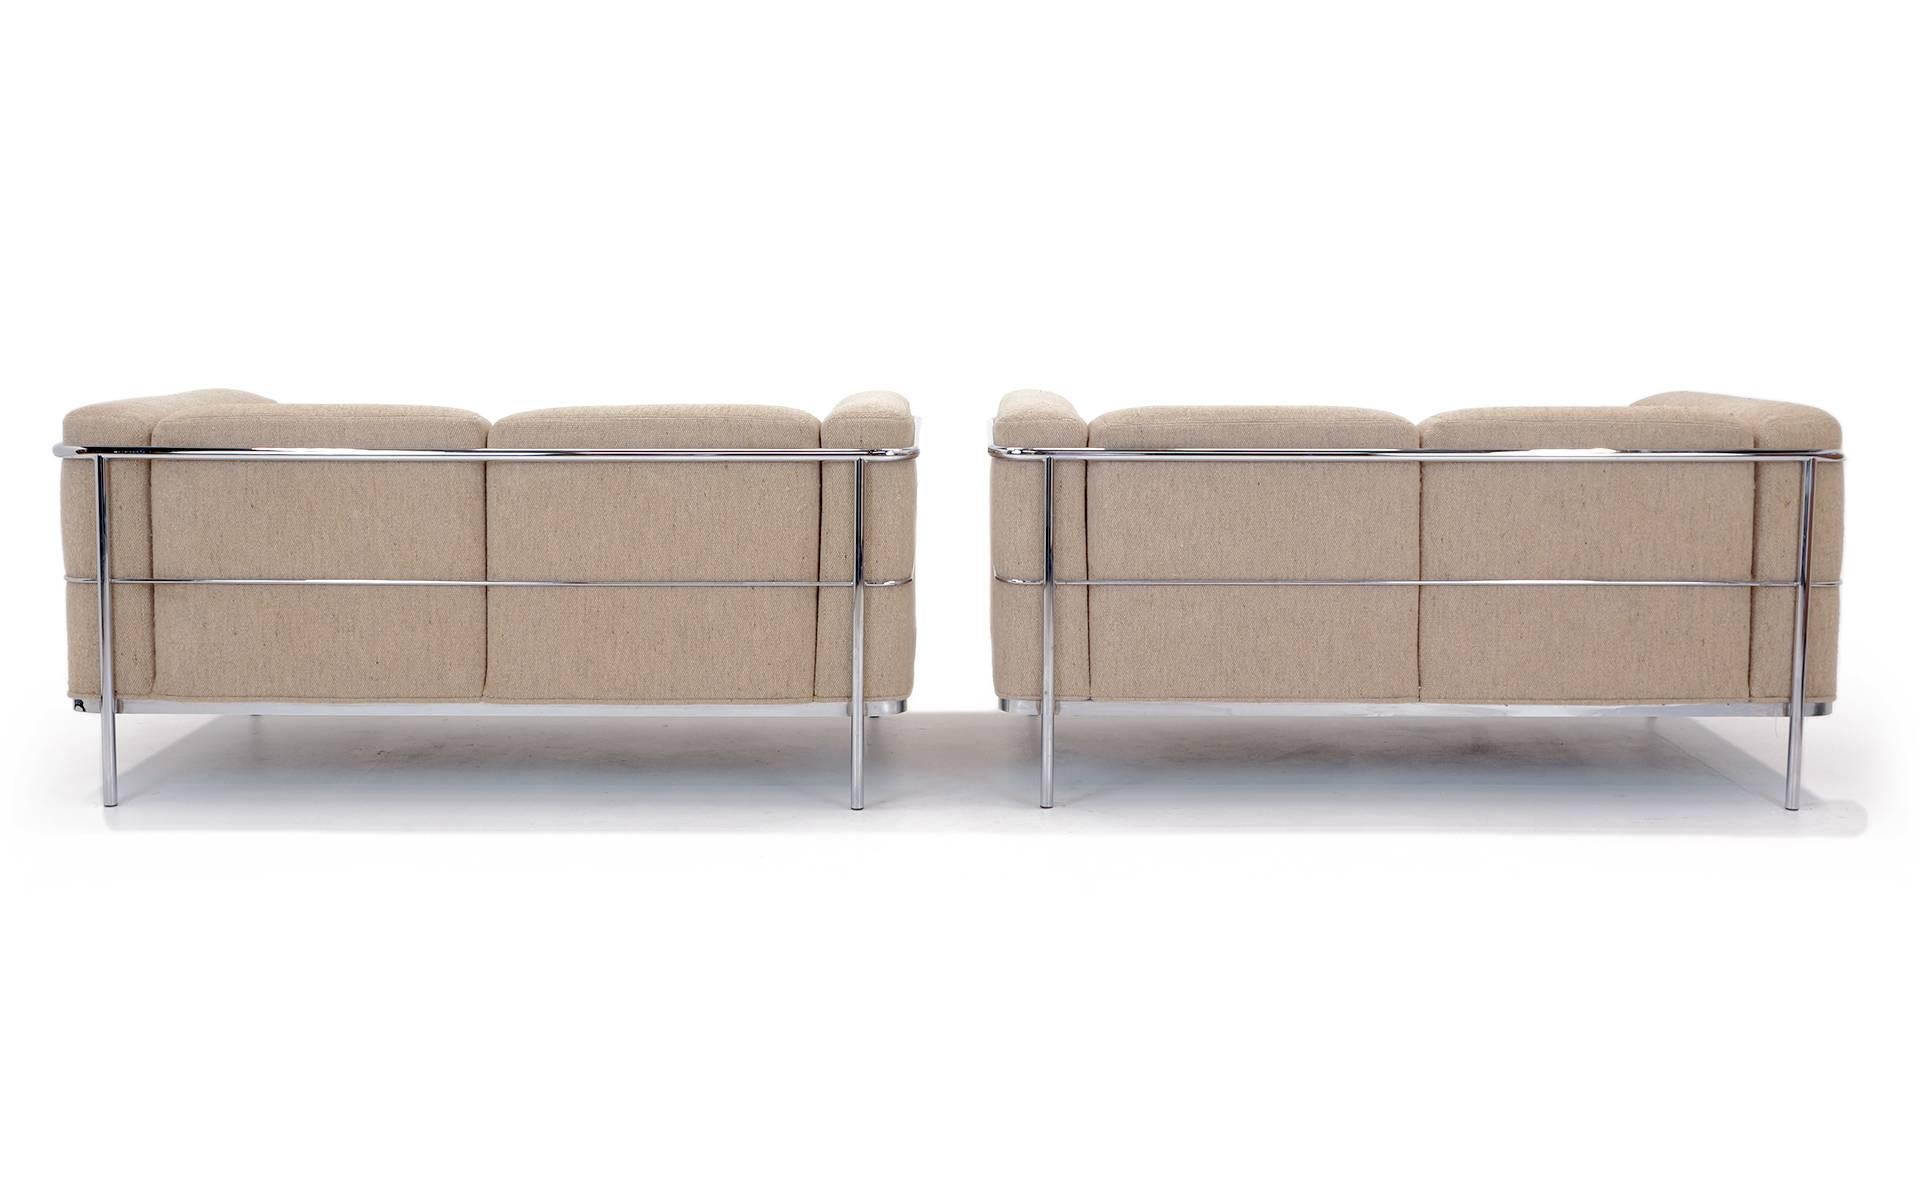 American Pair of Le Corbusier Style Settee or Loveseats by Jack Cartwright